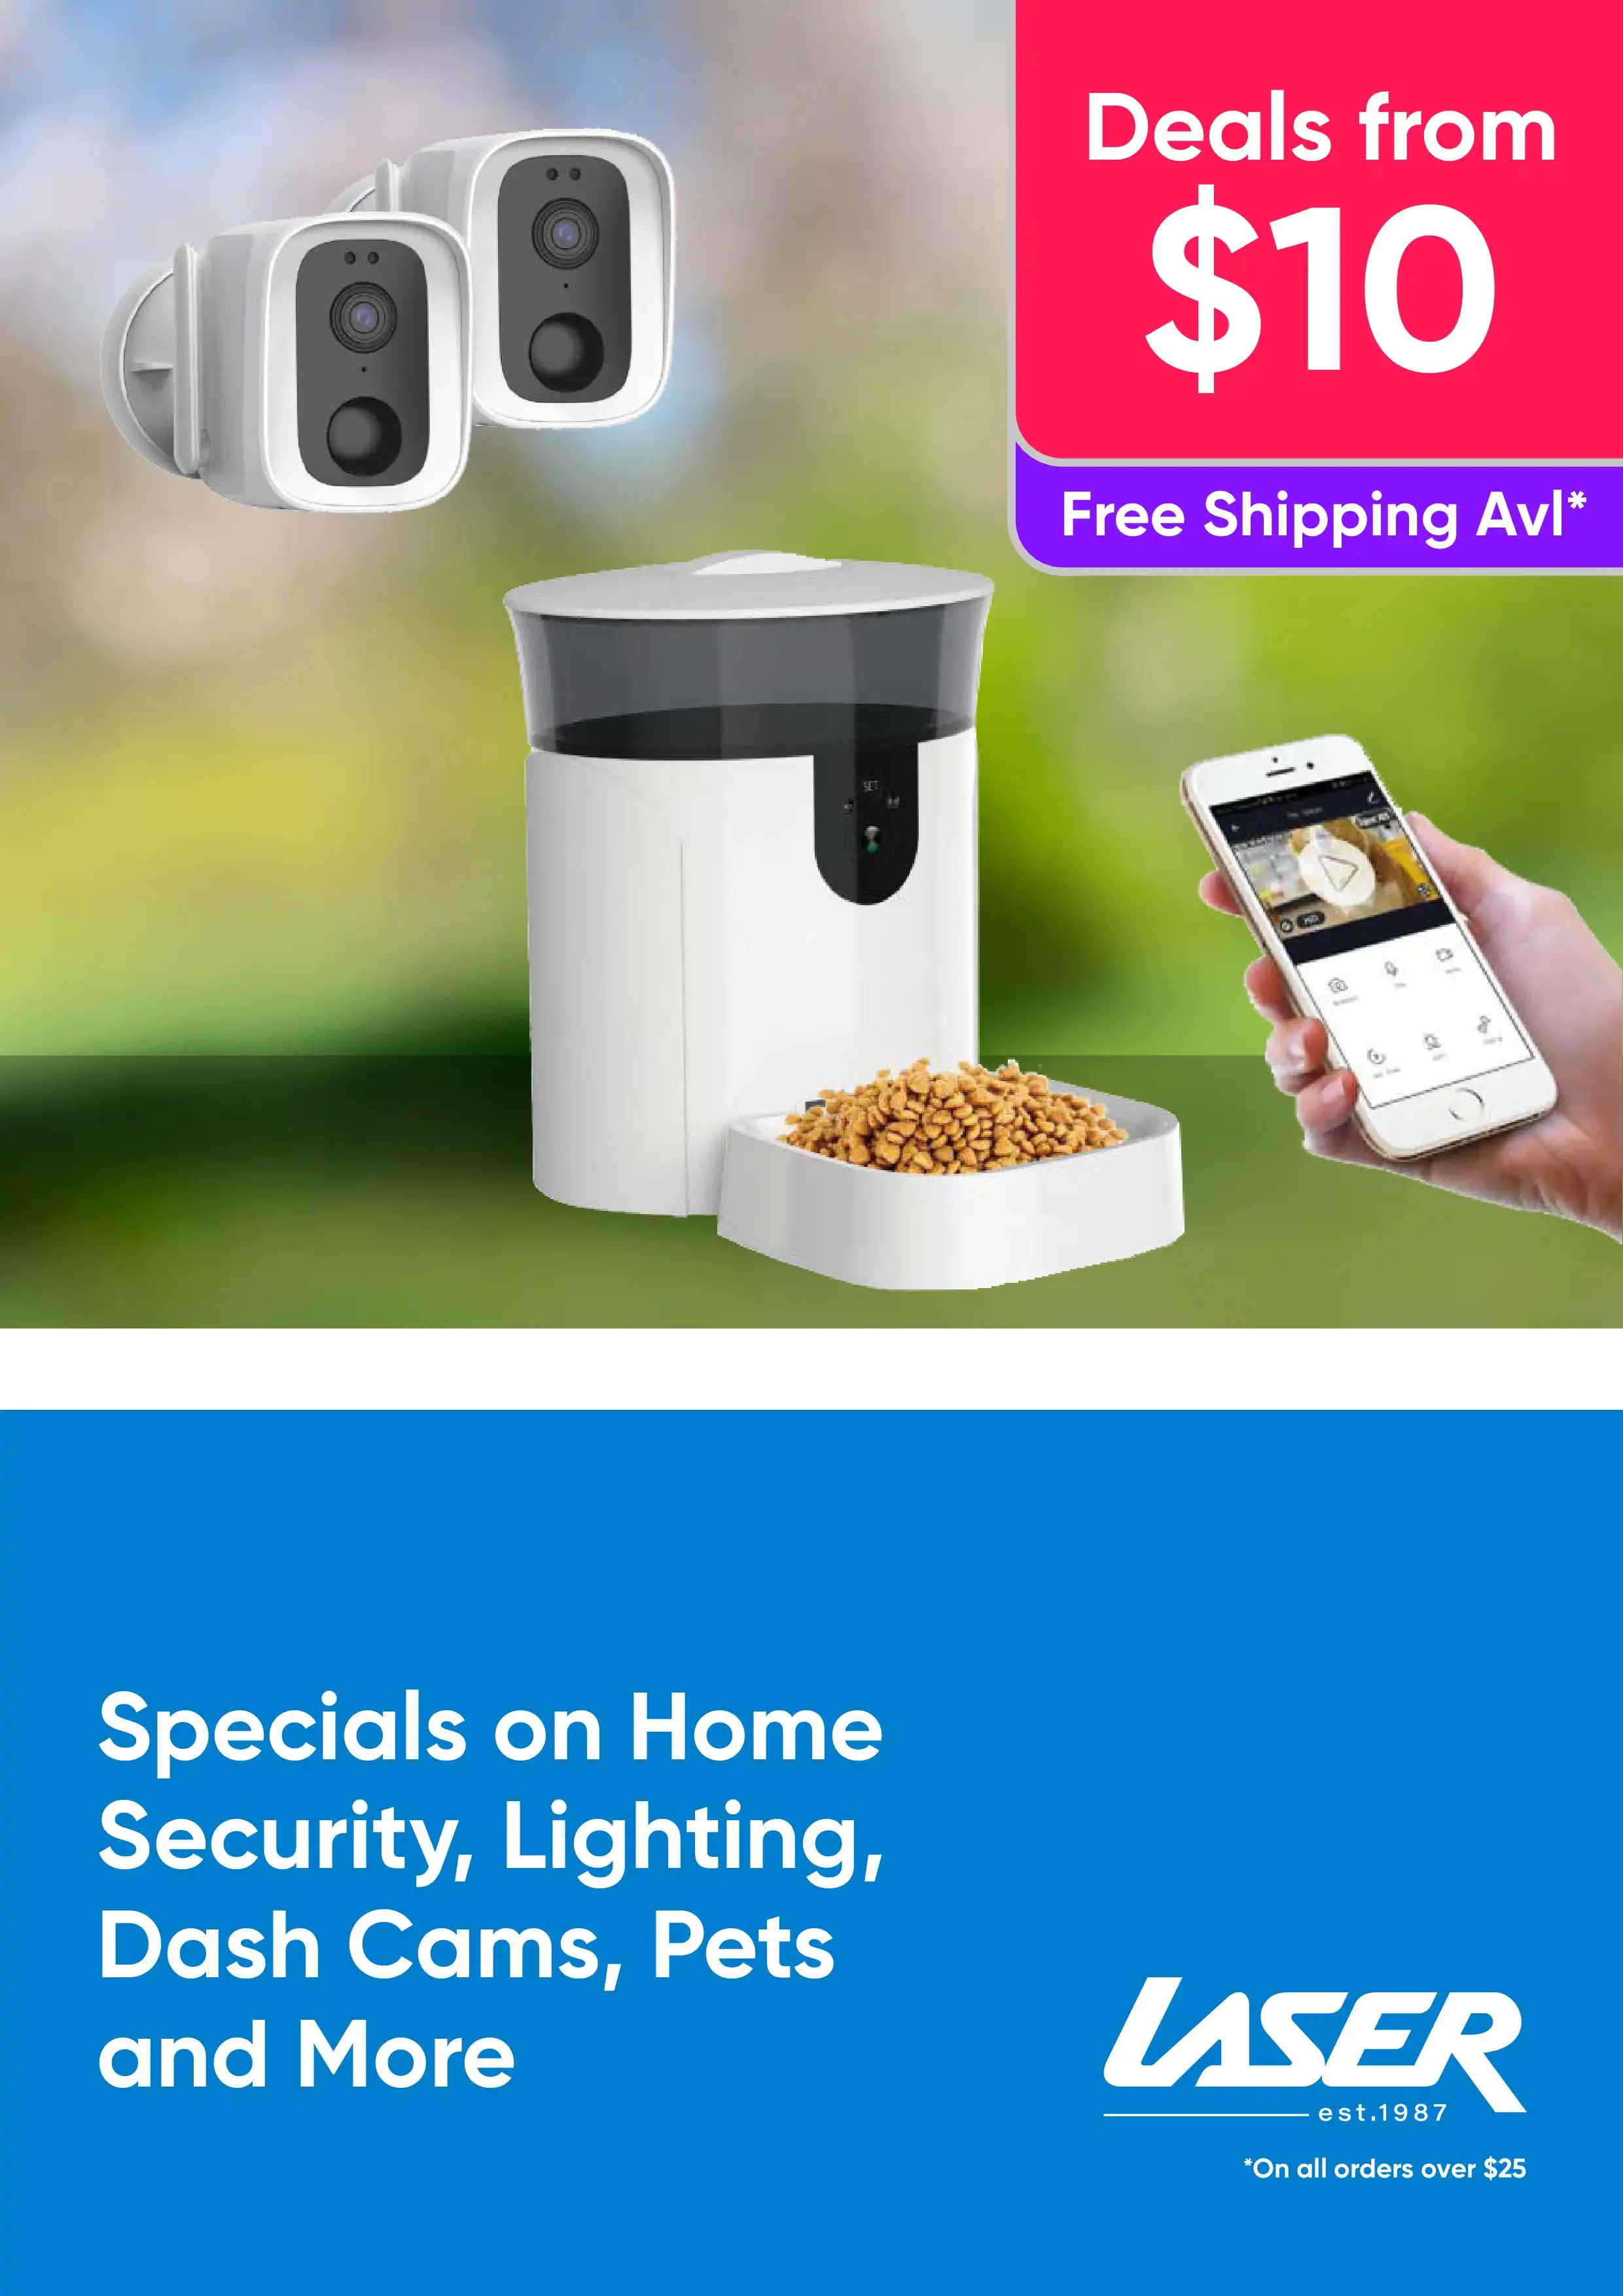 Buy Specials on Home Security, Lighting, Dash Cams, Pets and More